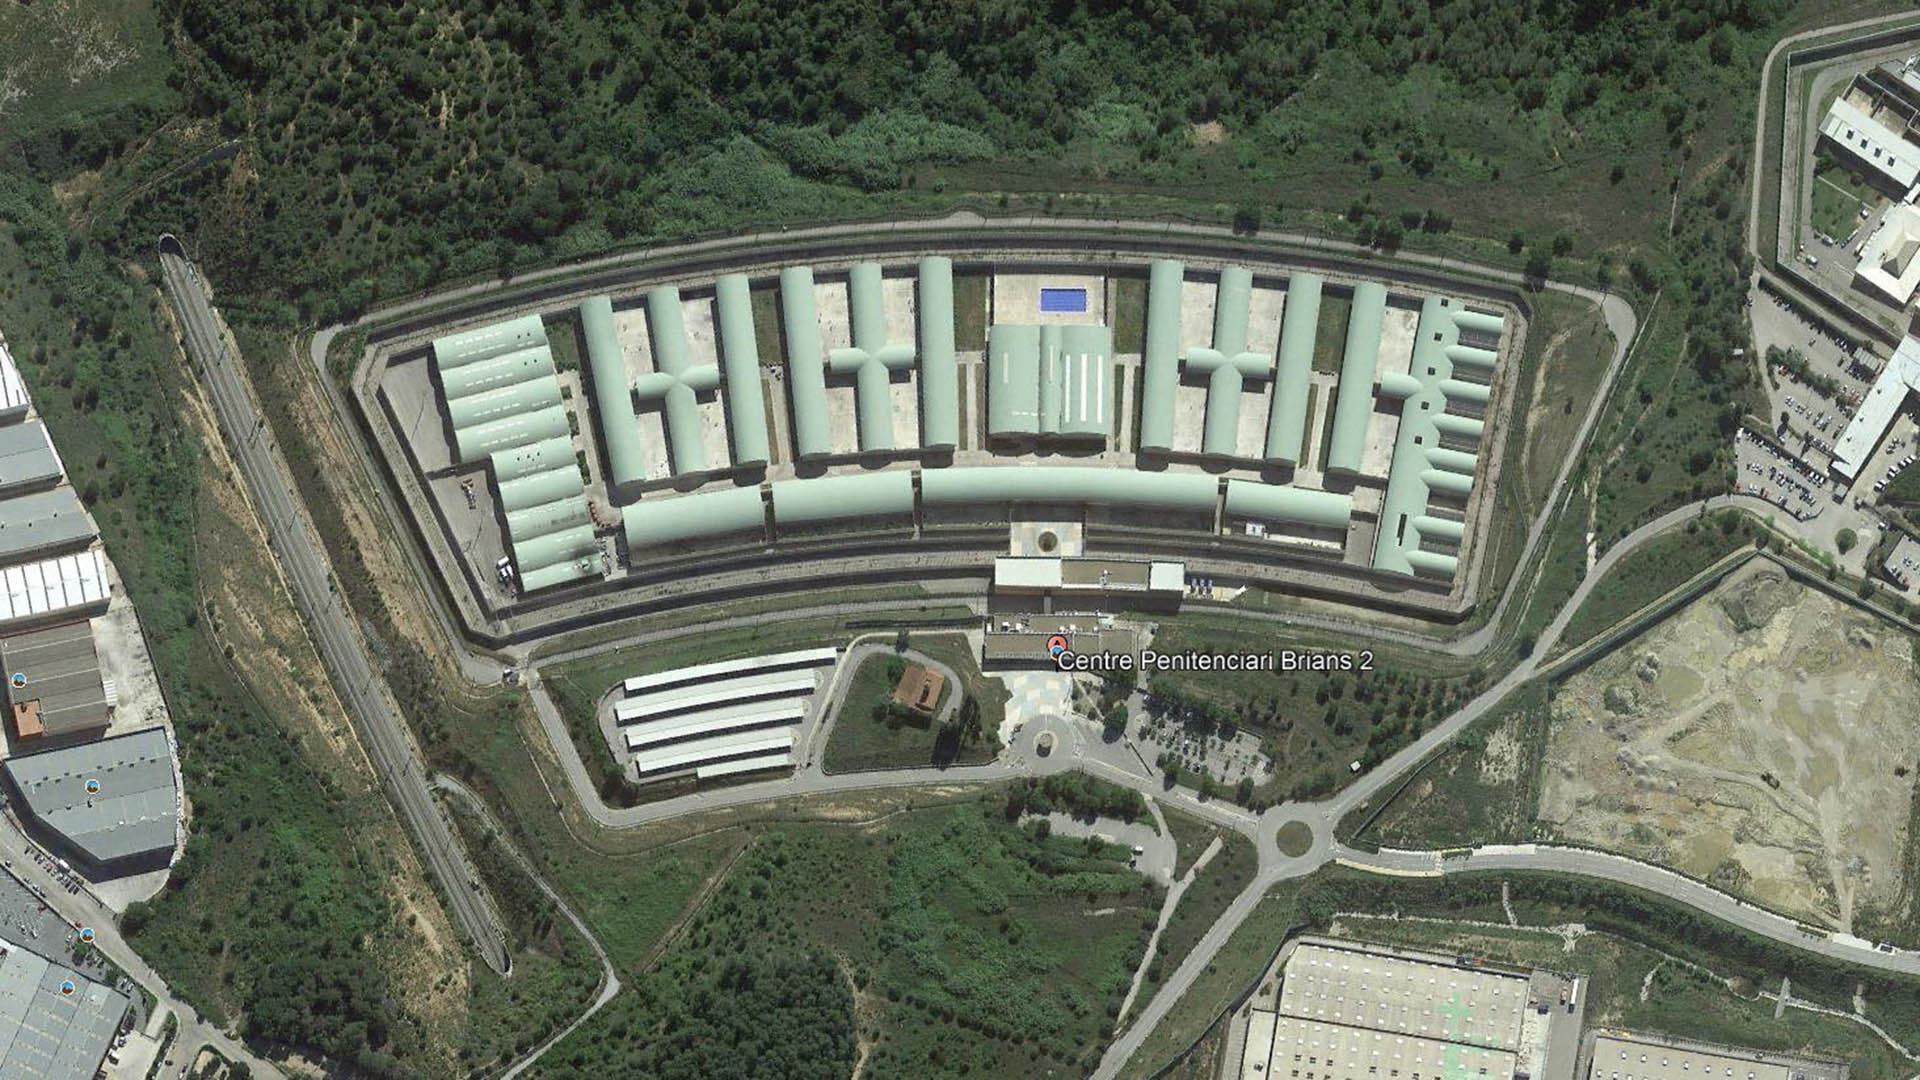 Aerial view of the jail where the Brazilian player is located